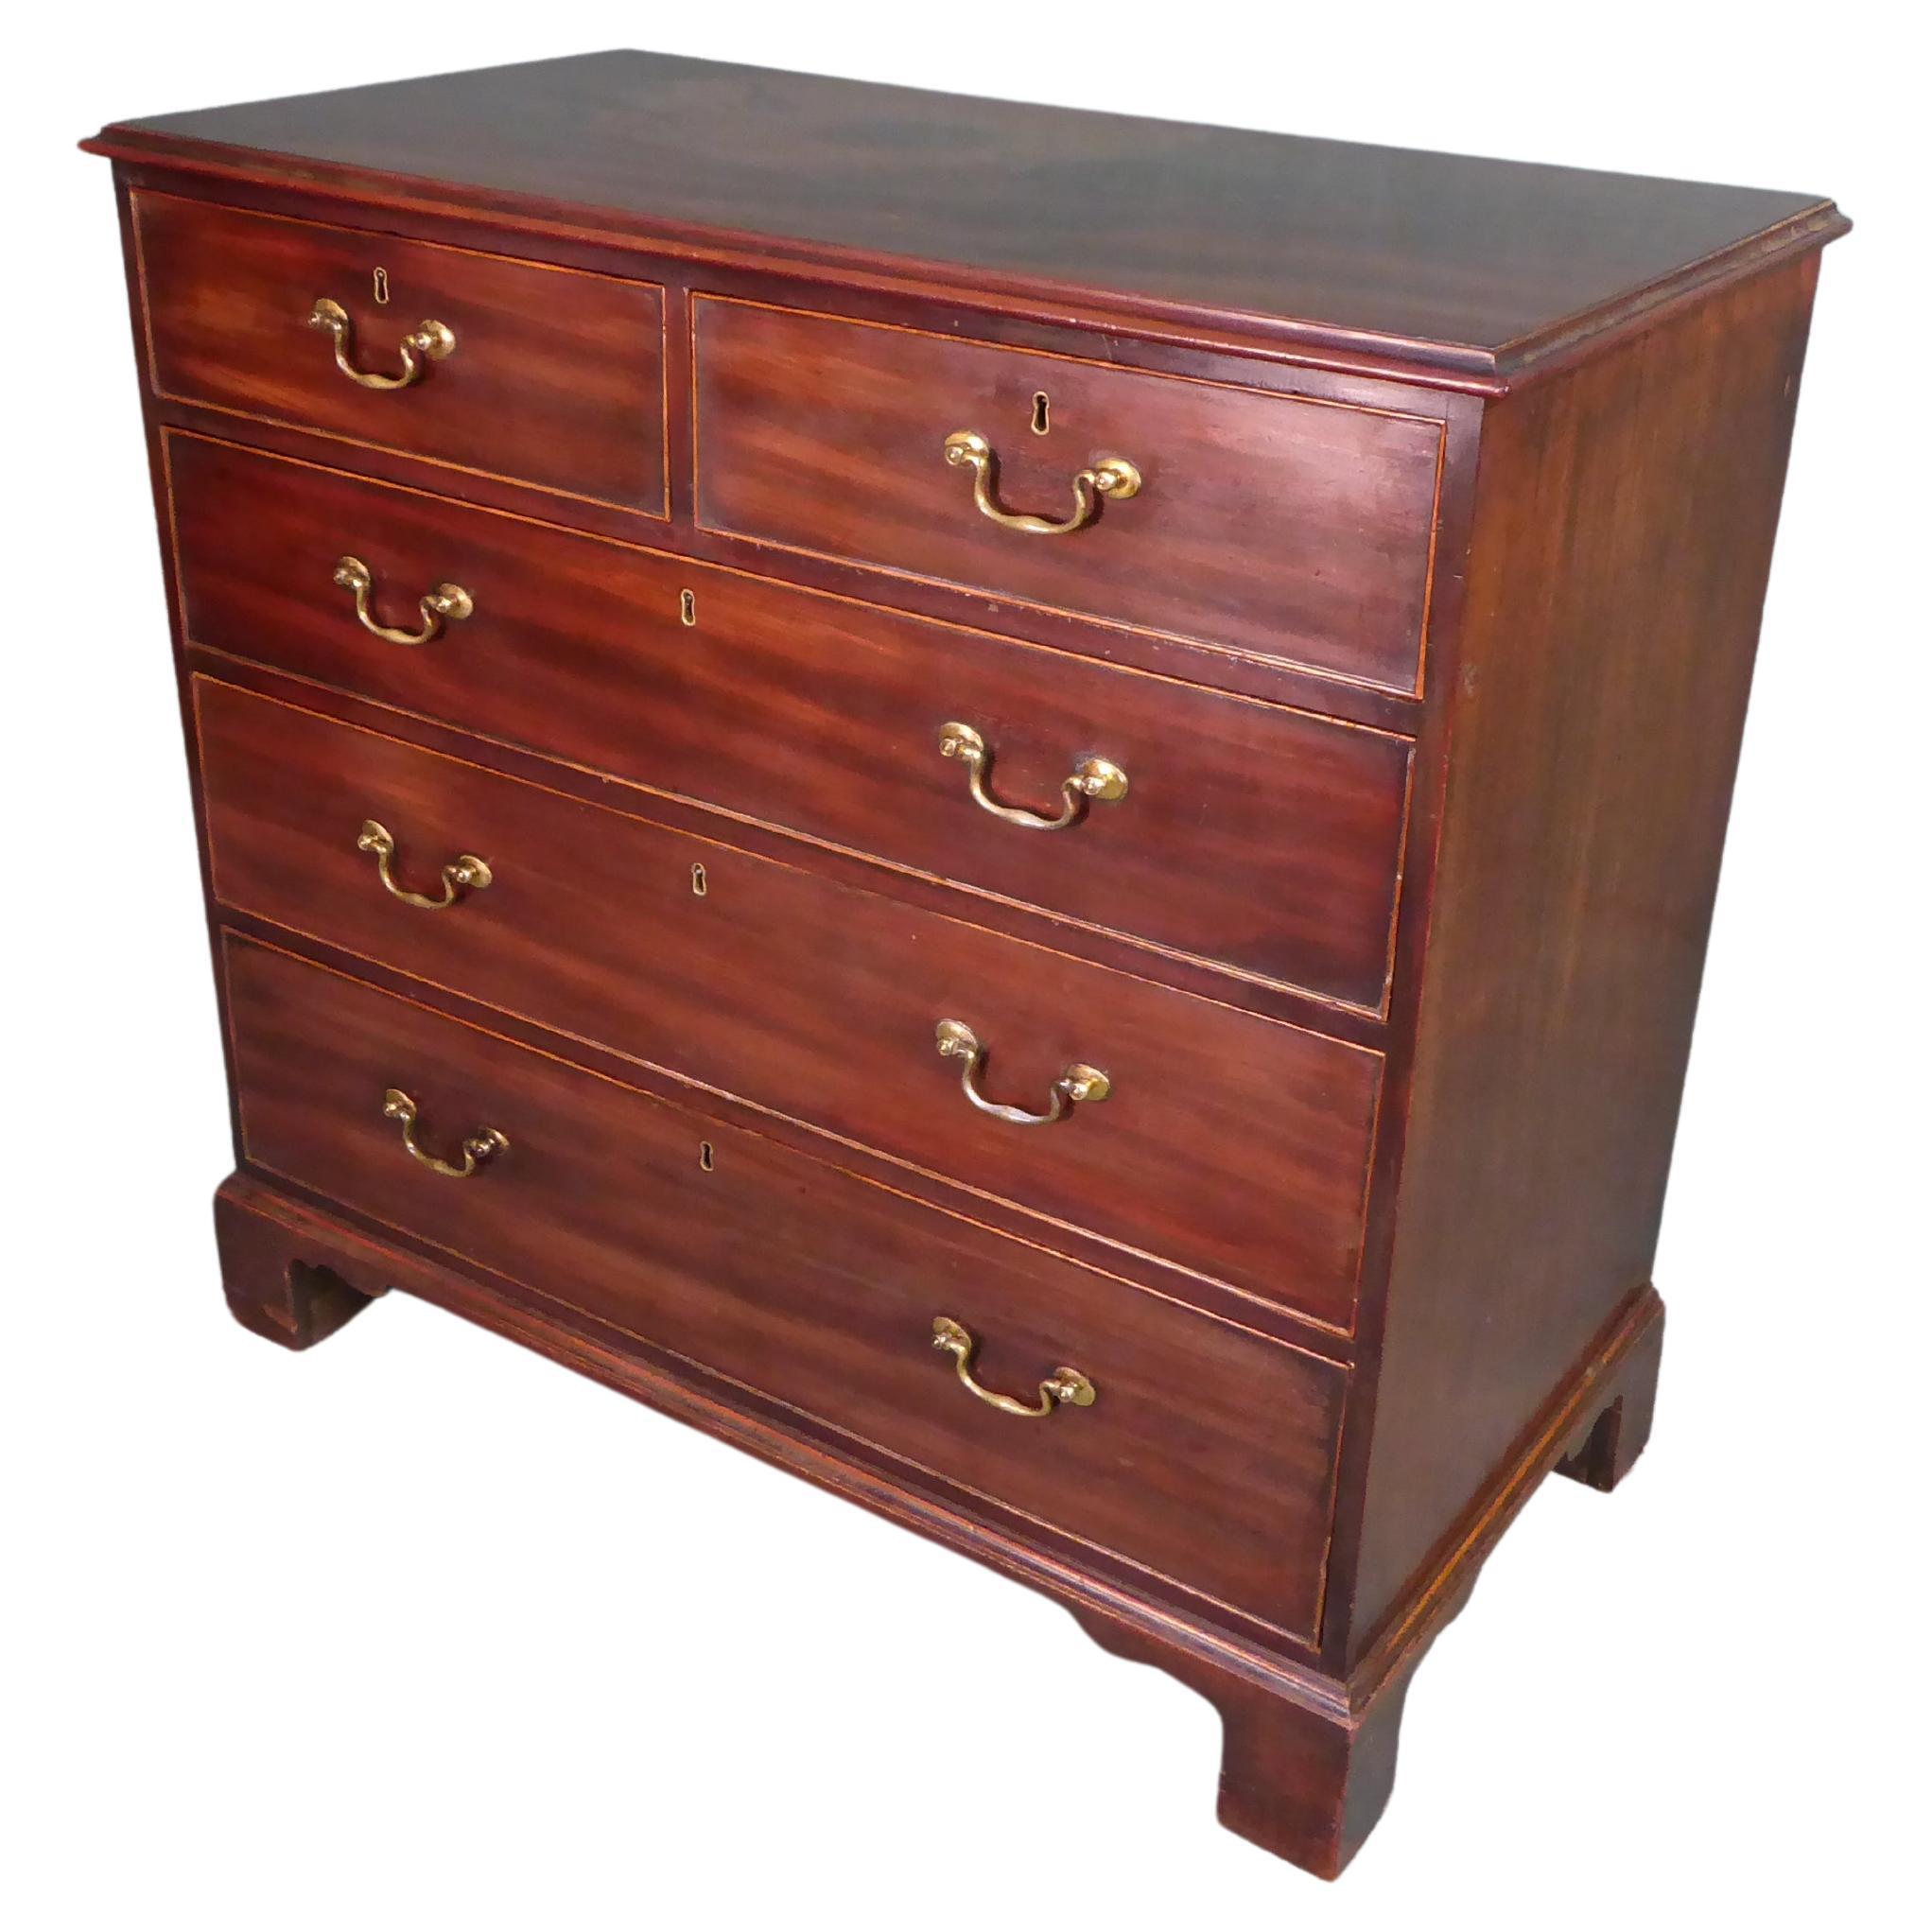 Antique Georgian mahogany scotttish chest of drawers with secret drawers within. For Sale